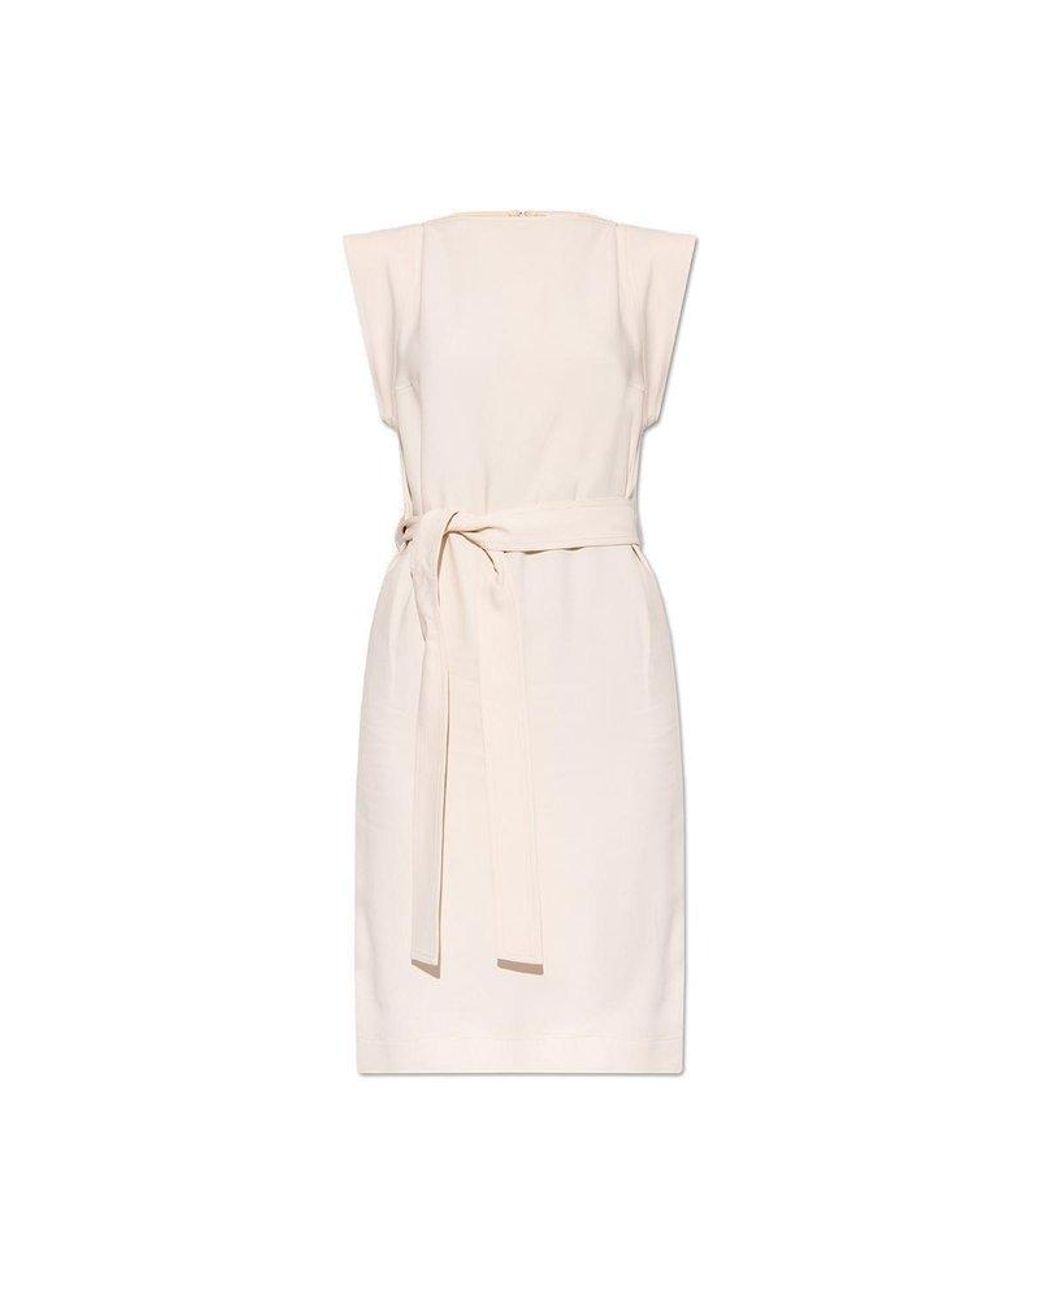 Burberry Alina Boat Neck Belted Dress in White | Lyst Canada